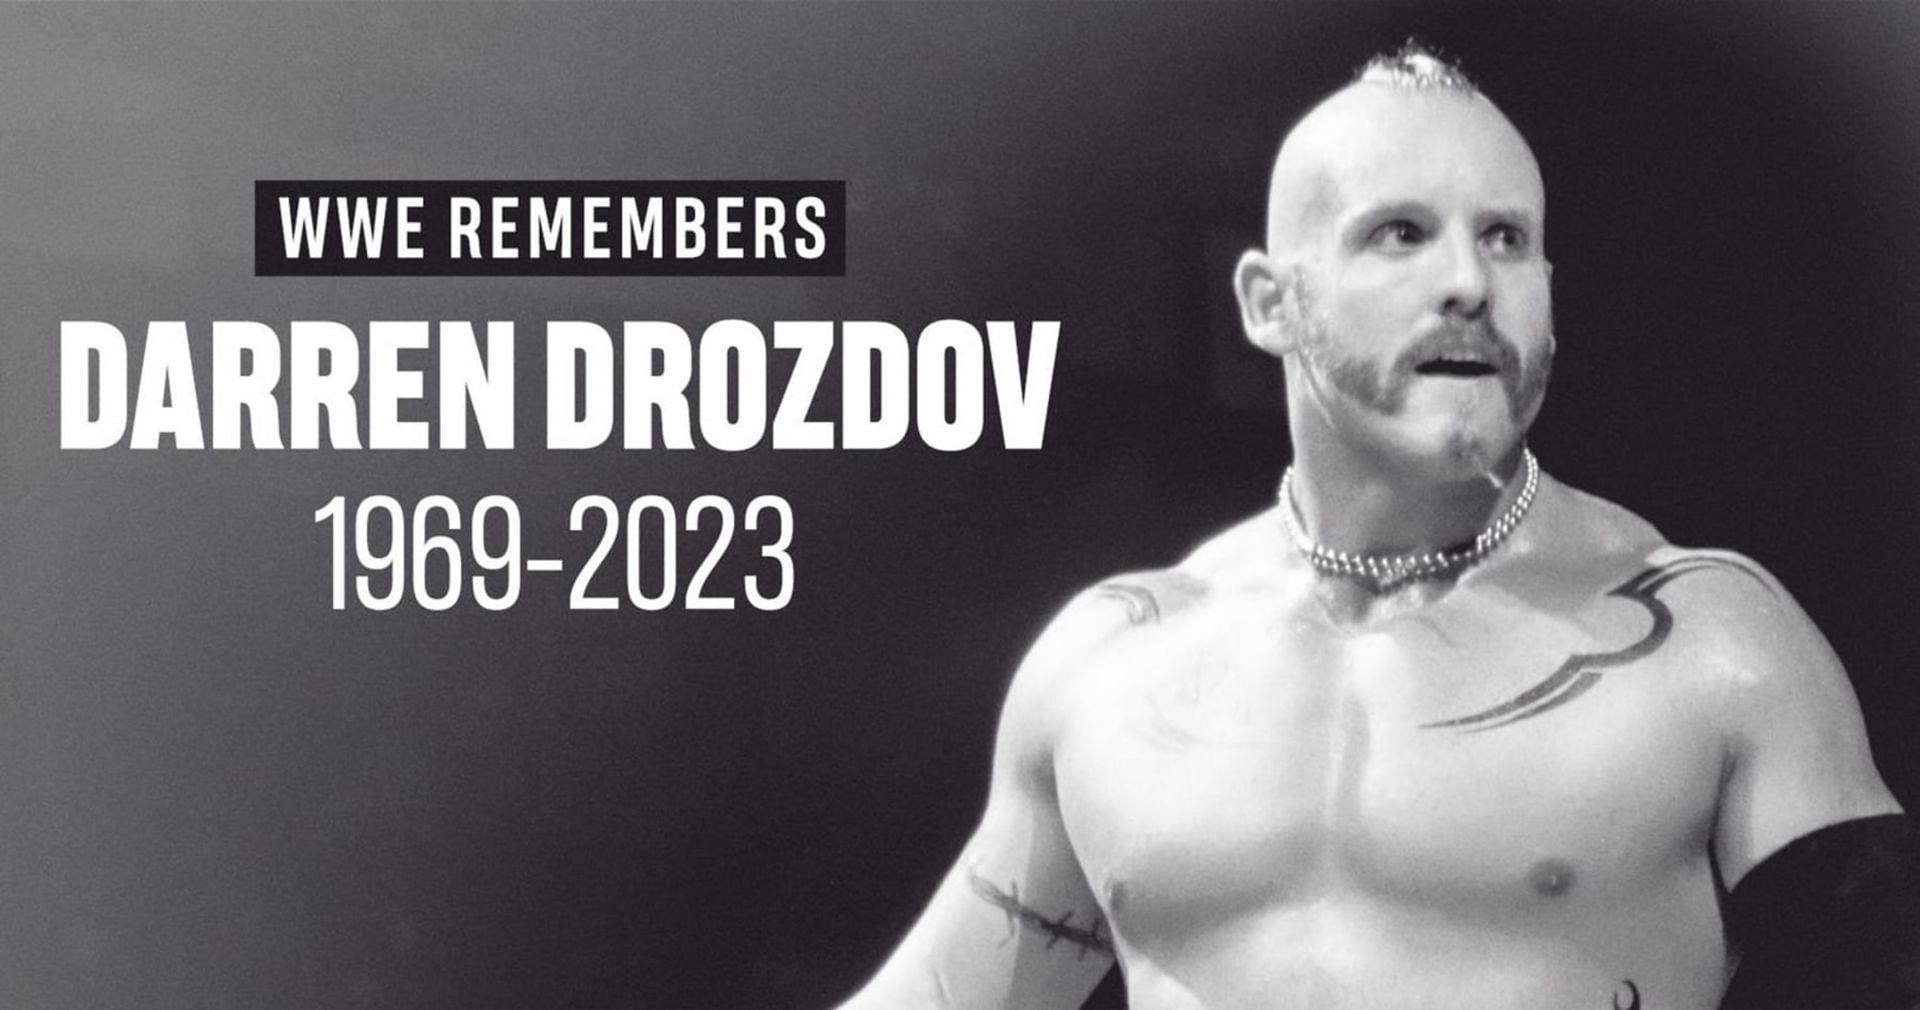 Darren Drozdov passed away at only 54 years old.